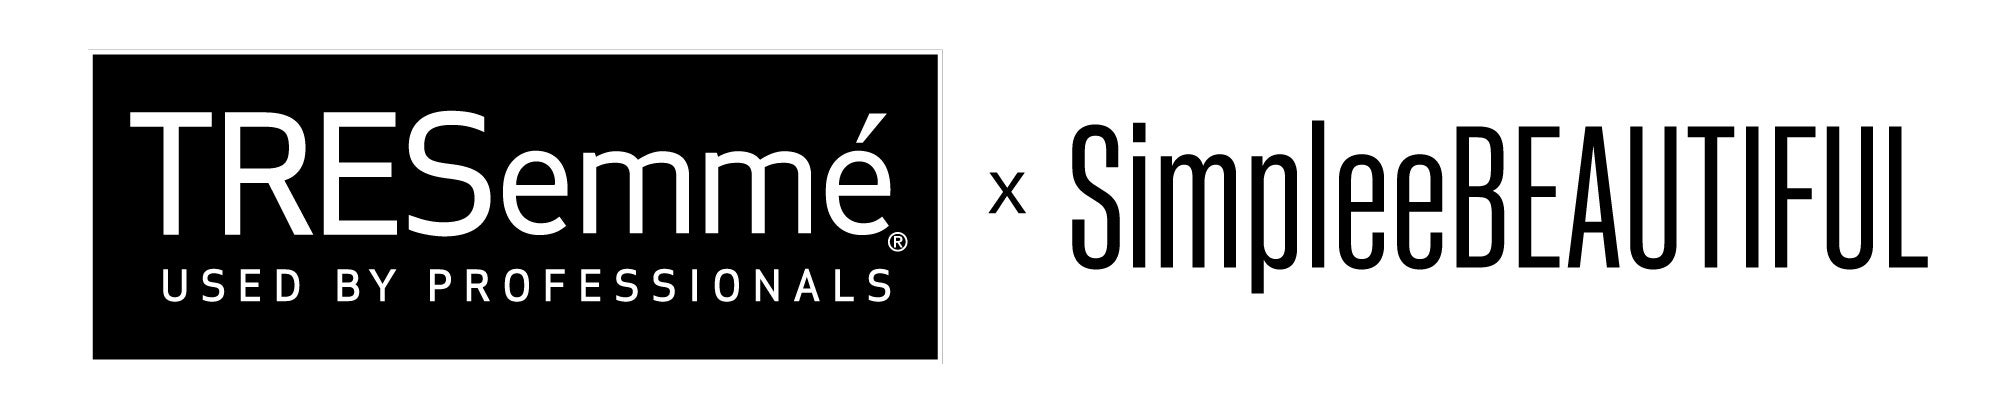 TRESemmé and SimpleeBEAUTIFUL Launch Texture Certification Program To Educate Stylists Across the U.S.